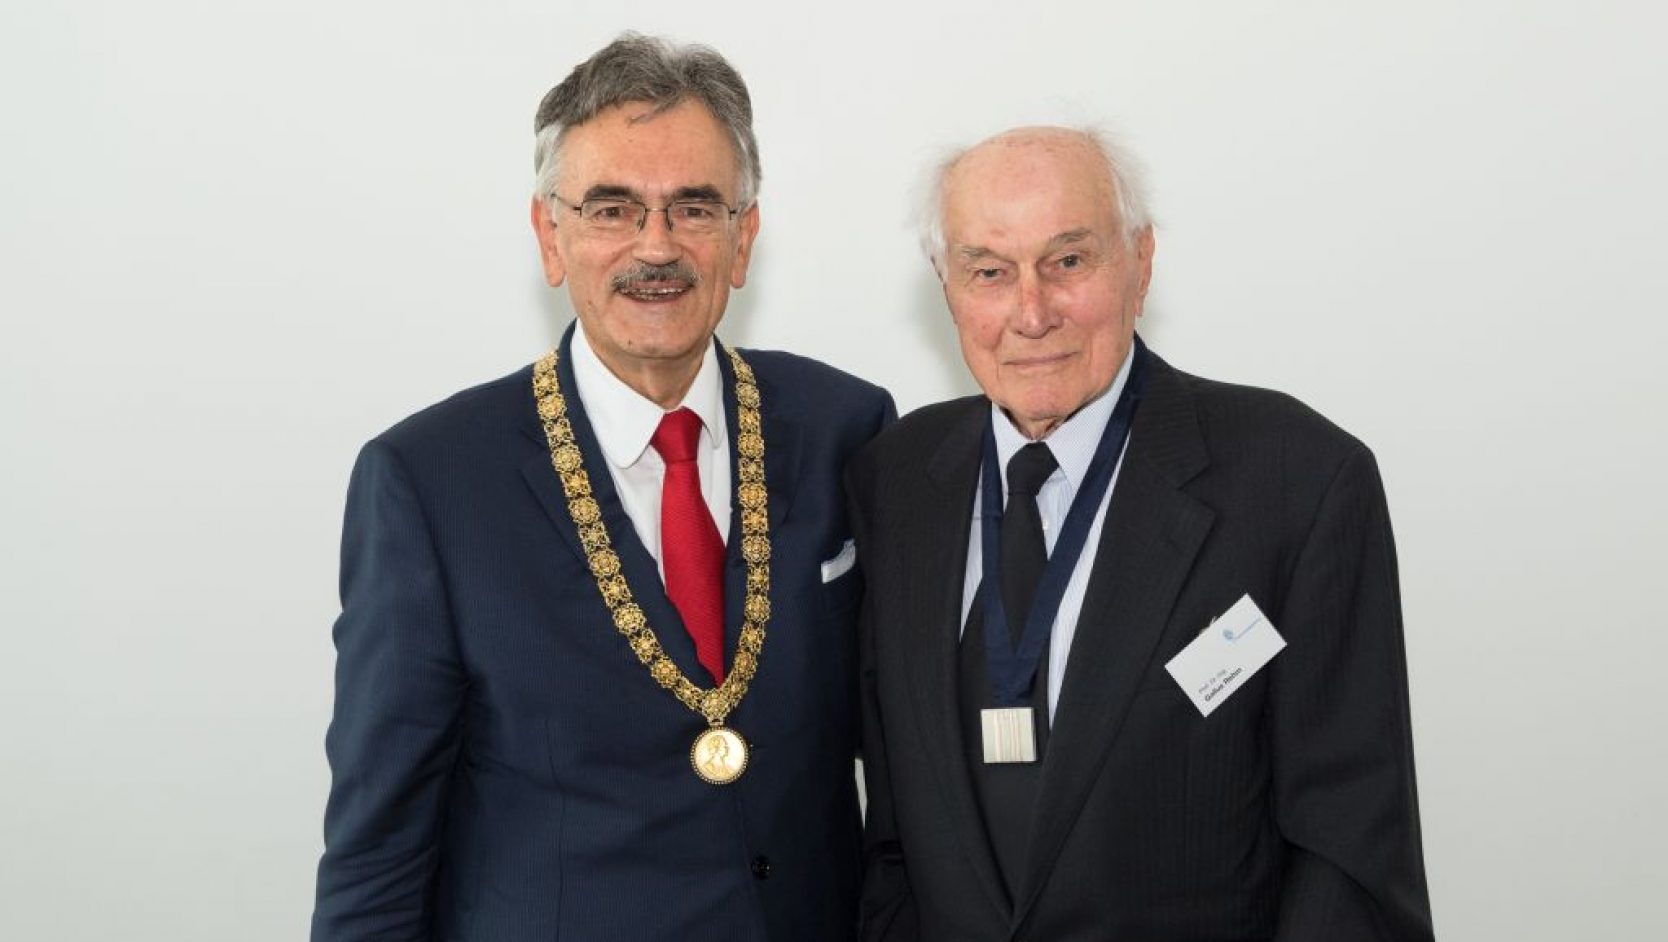 In 2018, the then TUM President Prof. Dr. Wolfgang A. Herrmann awarded Dr. Gallus Rehm the title of Honorary Senator (Photo: Uli Benz/TUM).